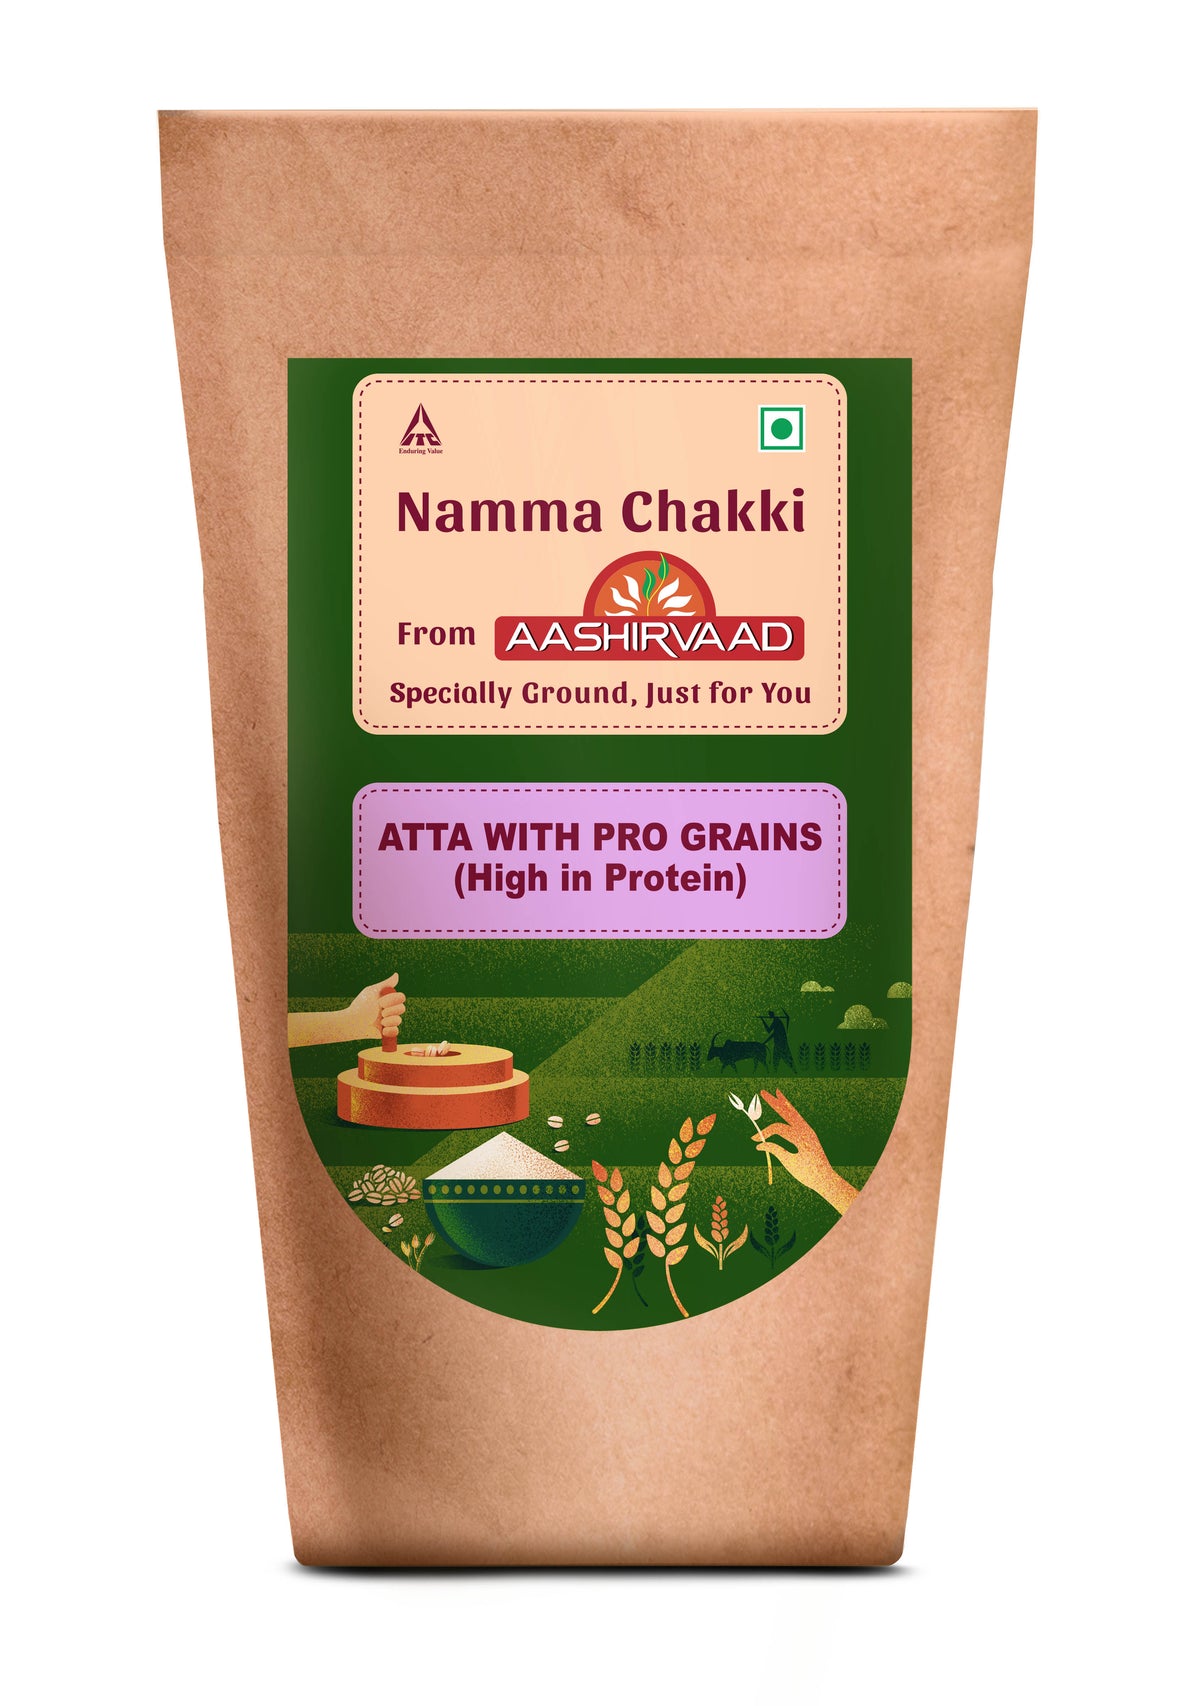 Atta with Pro grains (High in Protein)